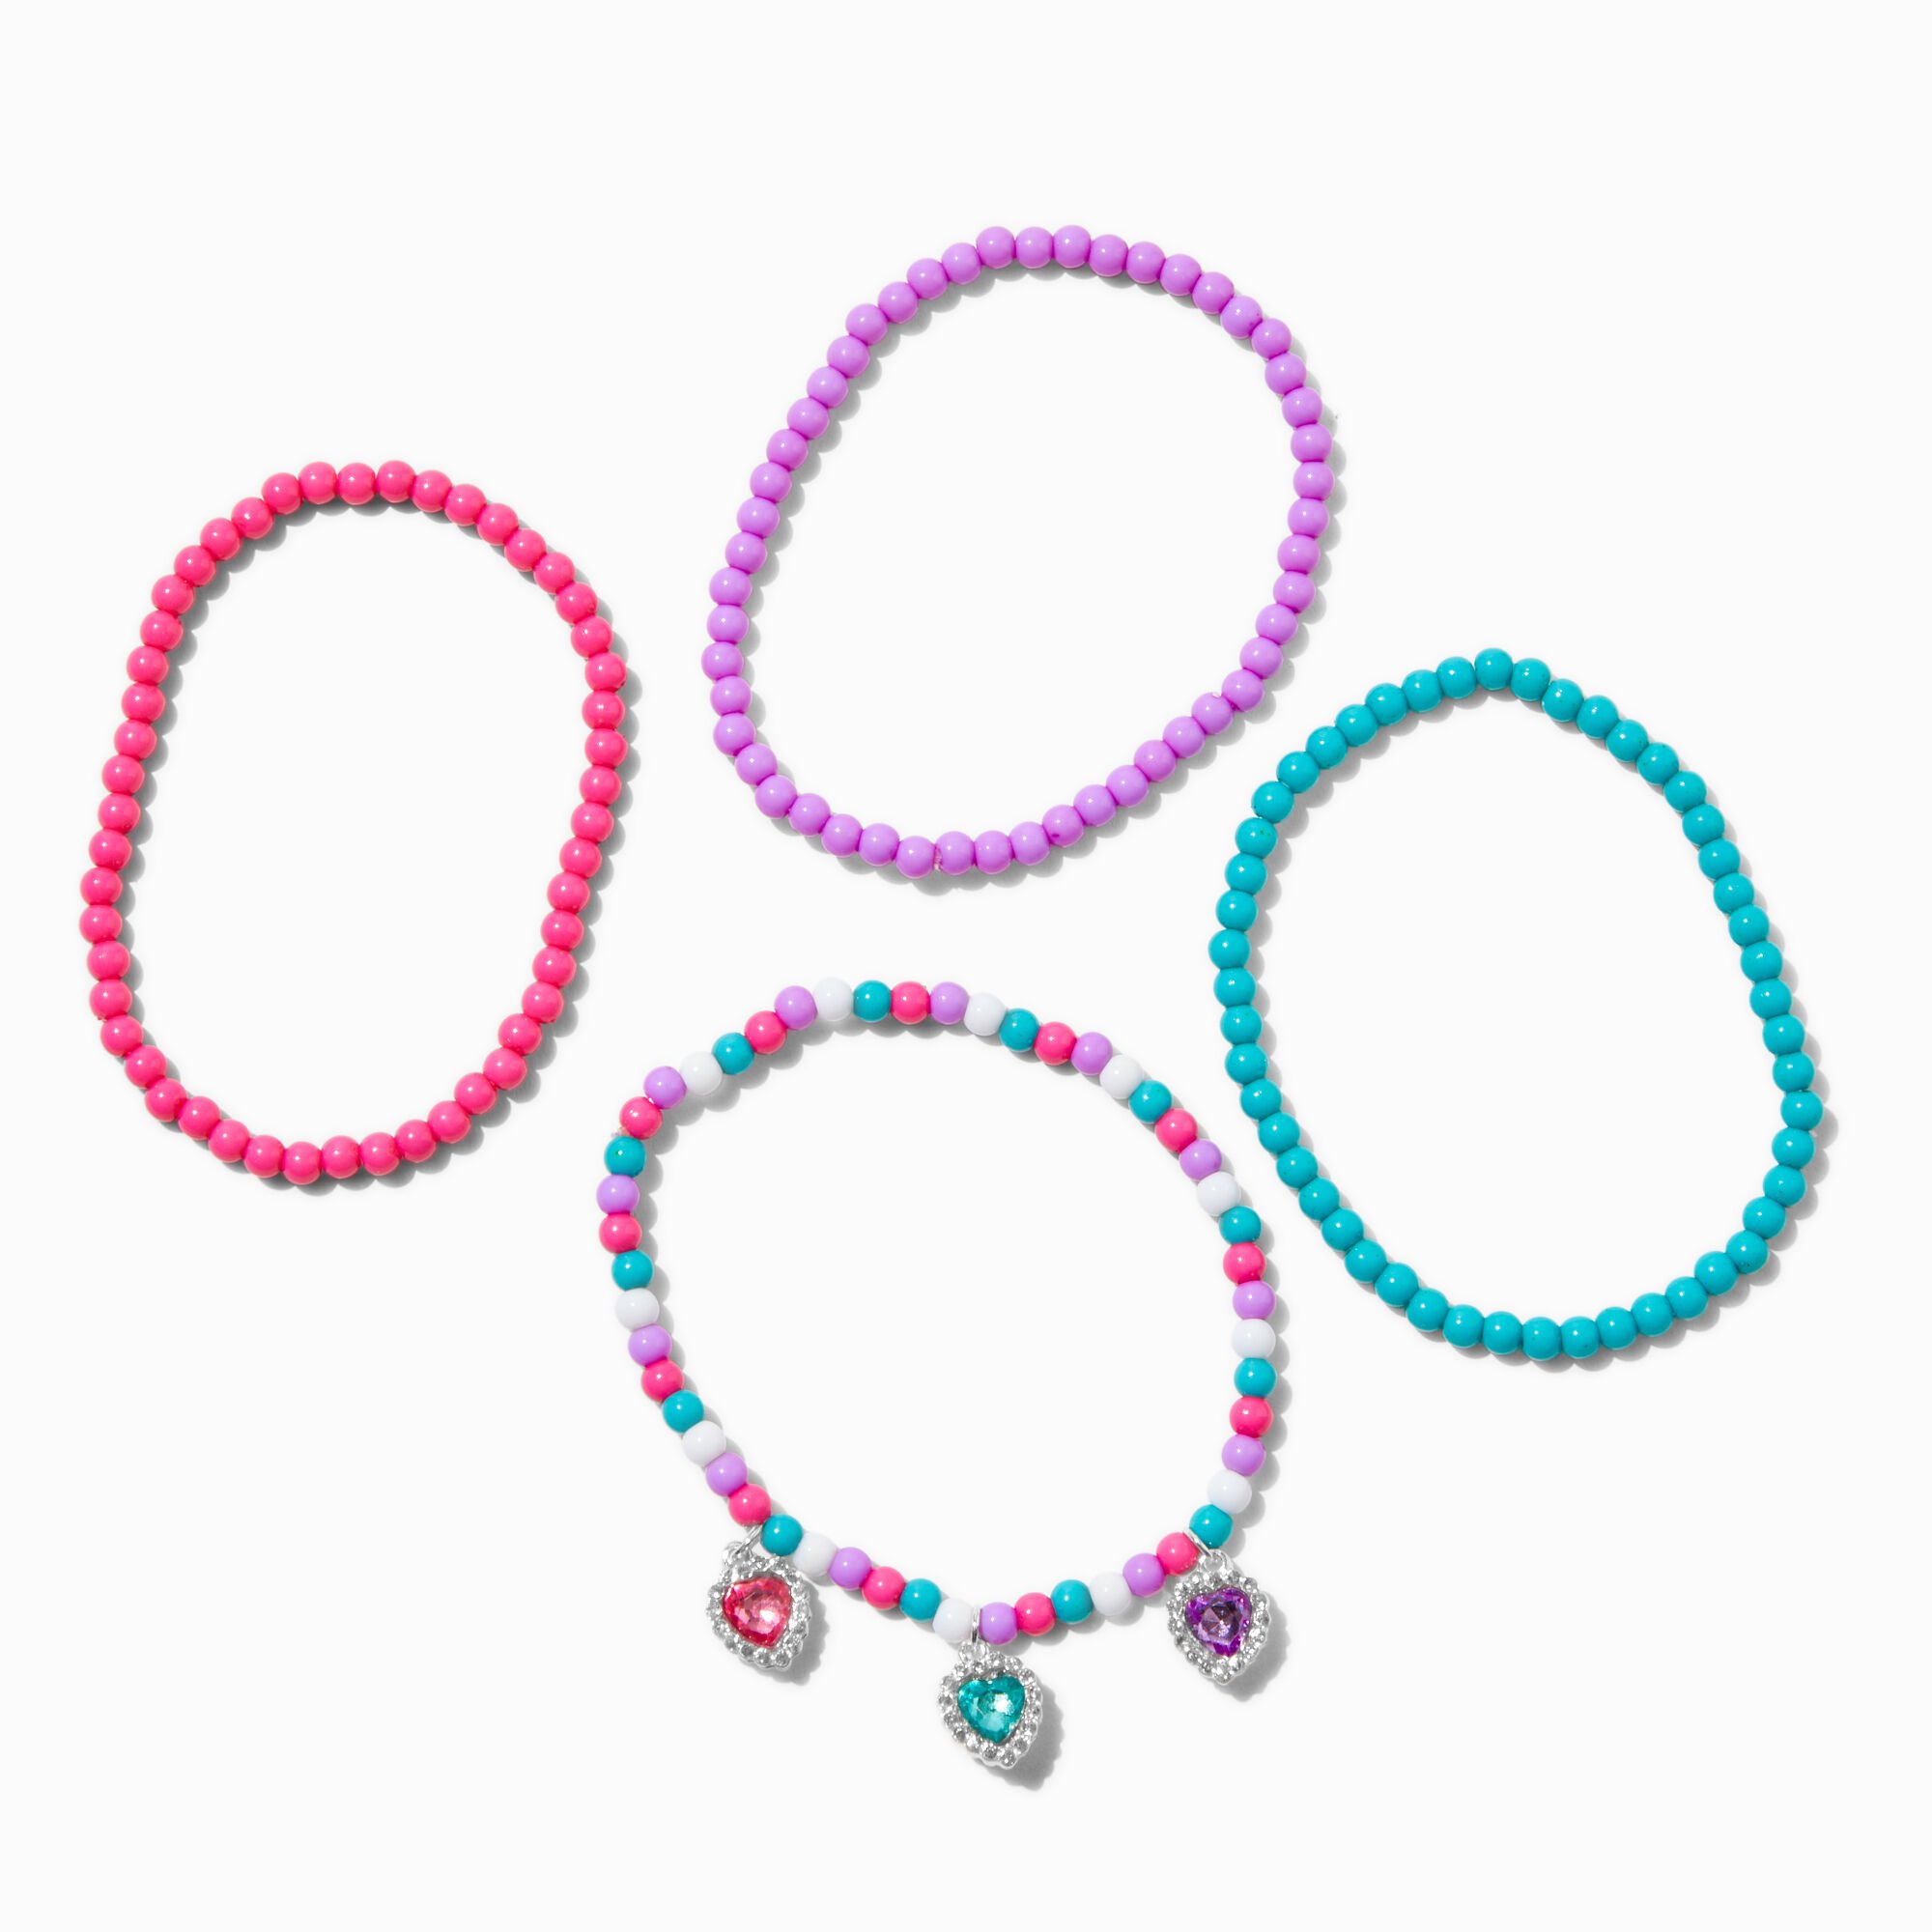 View Claires Club Jewel Tone Seed Bead Stretch Bracelets 4 Pack information